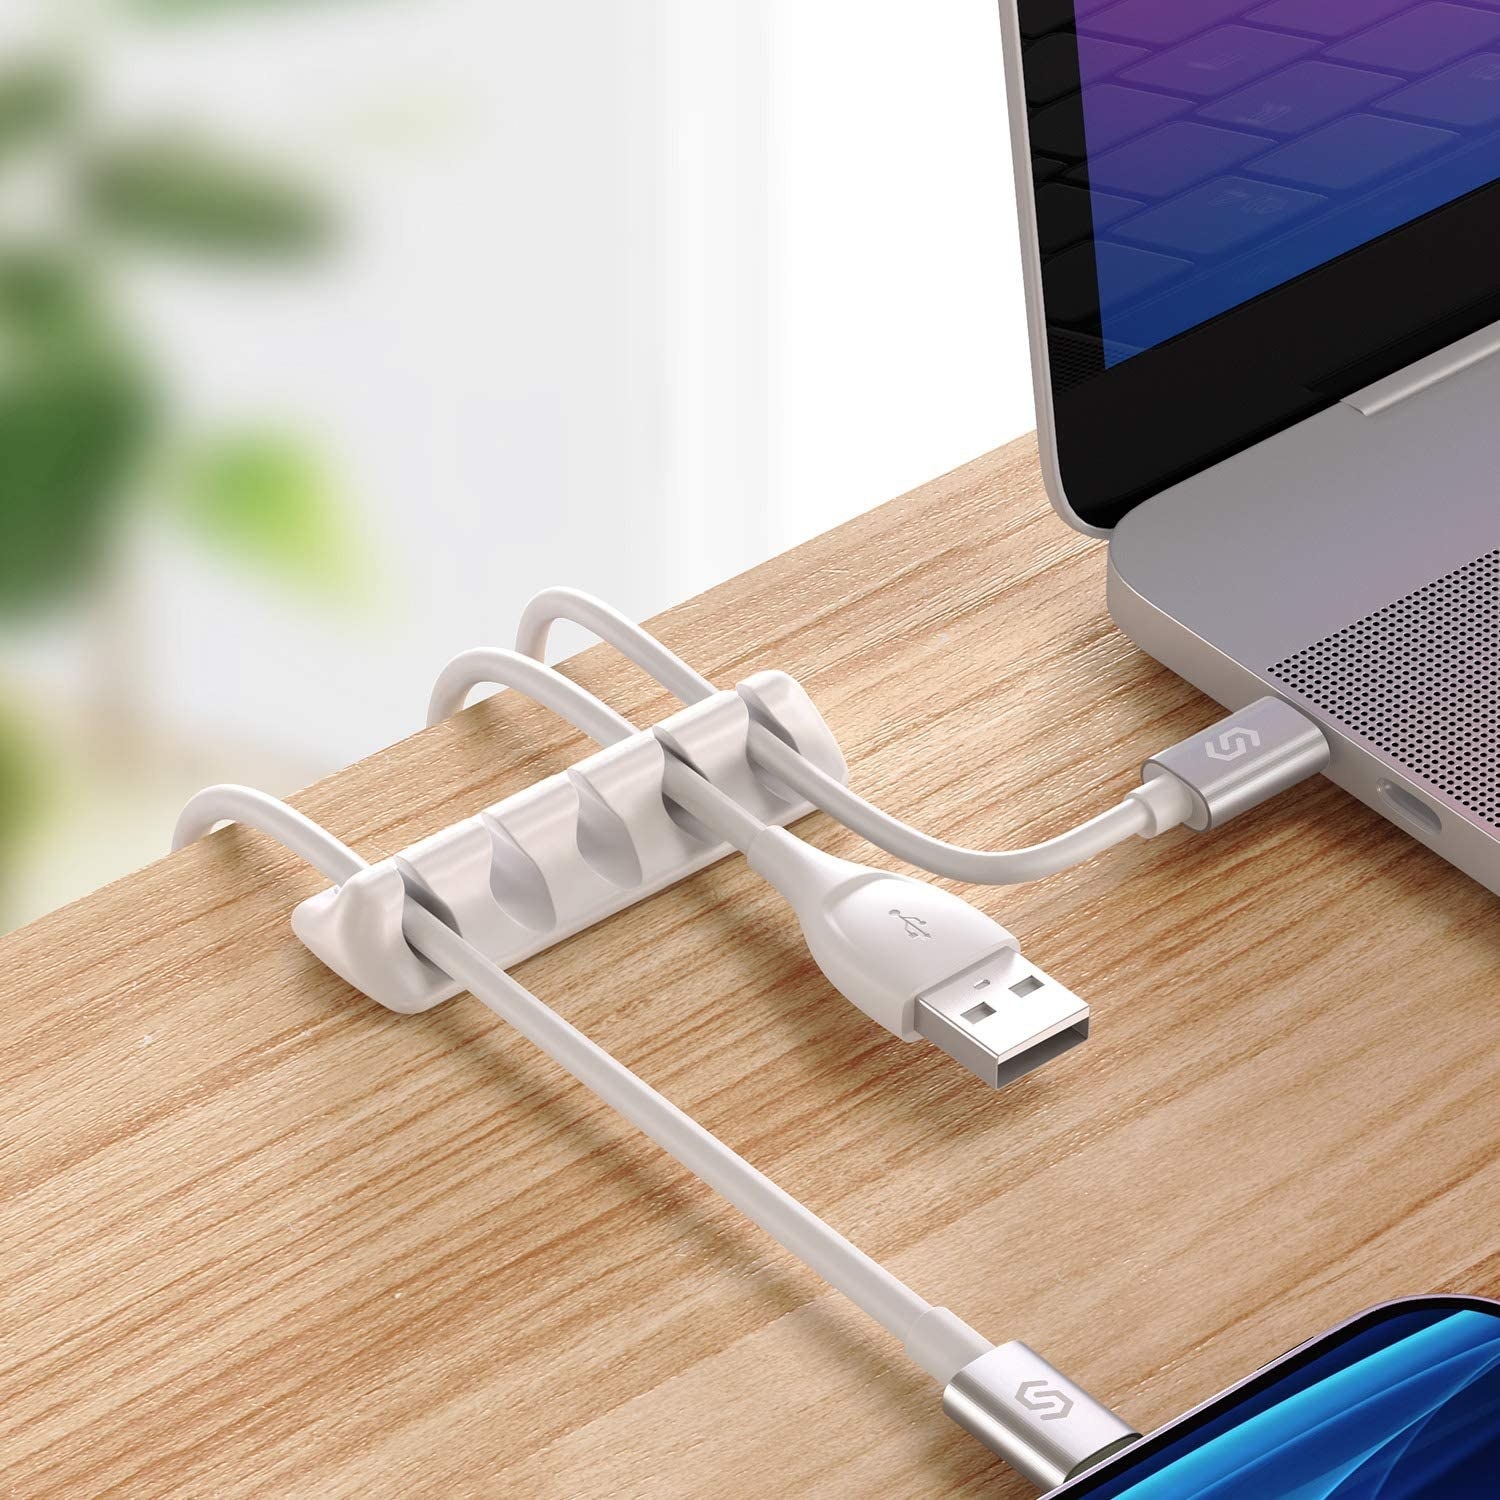 A close up of the sleek cable organizer on a desk top